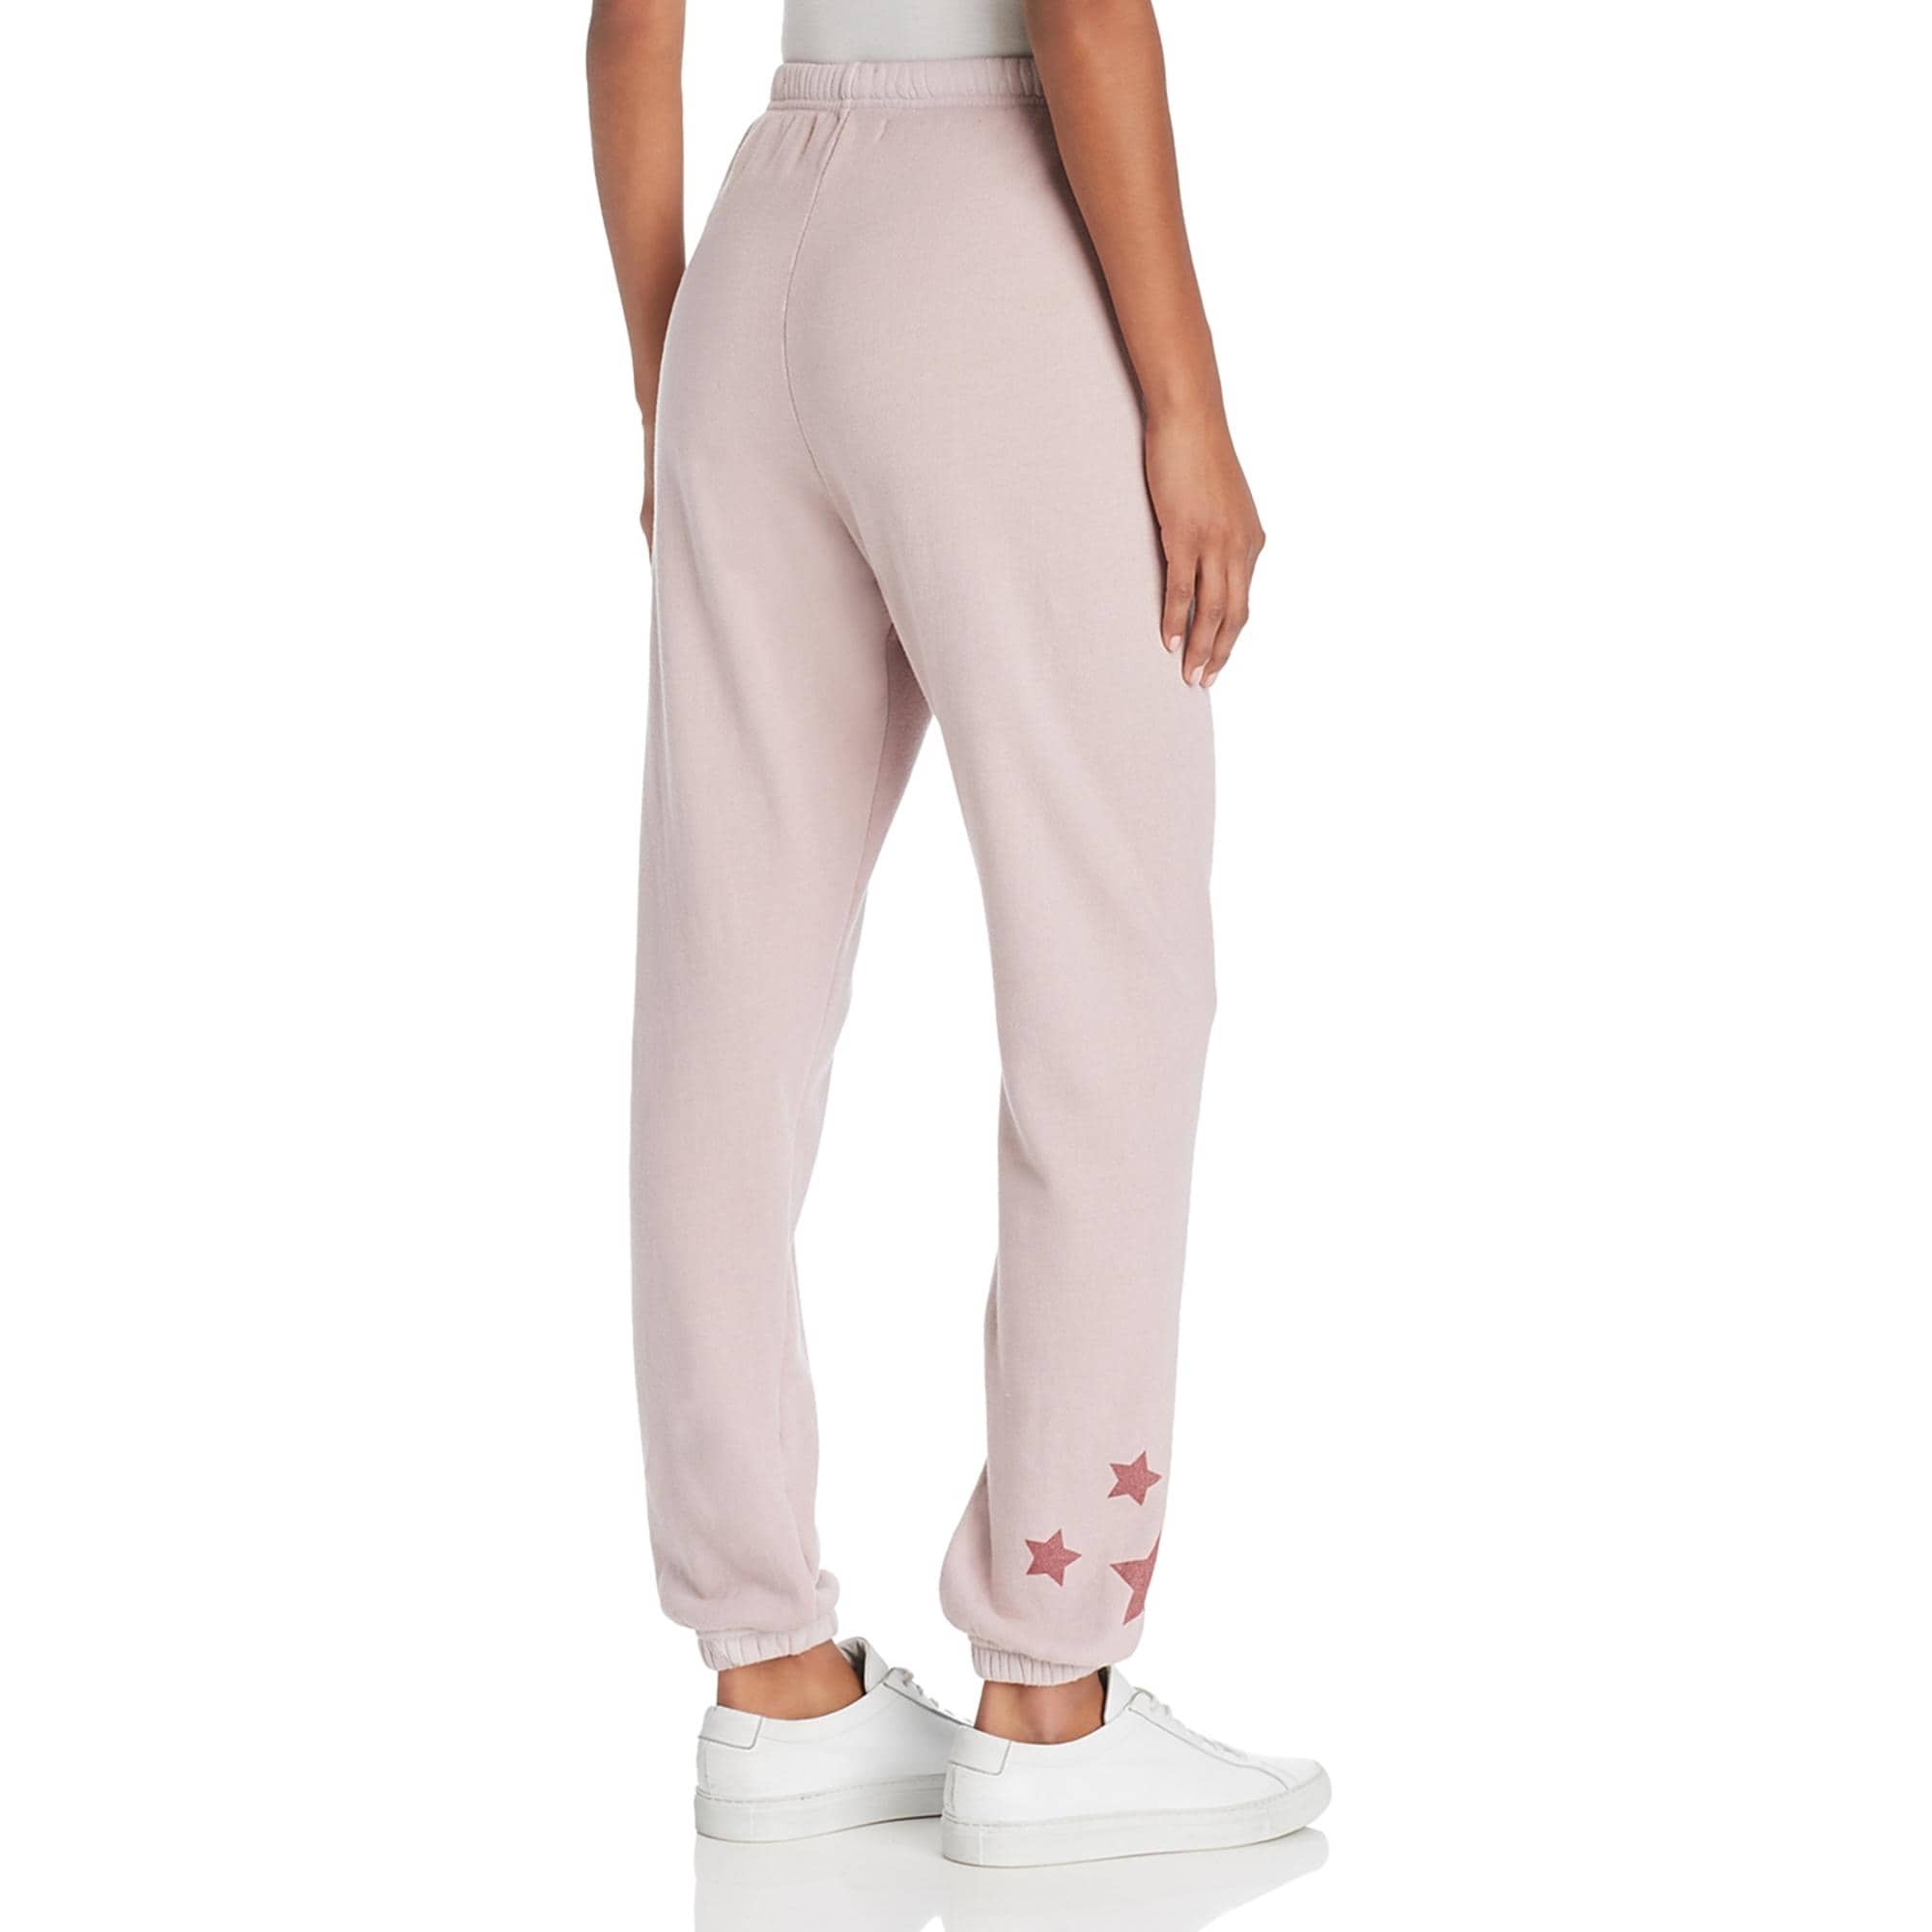 Spiritual Gangster Womens Stars Sessions Sweatpants Comfy Cozy Lavender Overstock 31503452 Star sessions with big time grain co. spiritual gangster womens stars sessions sweatpants comfy cozy lavender